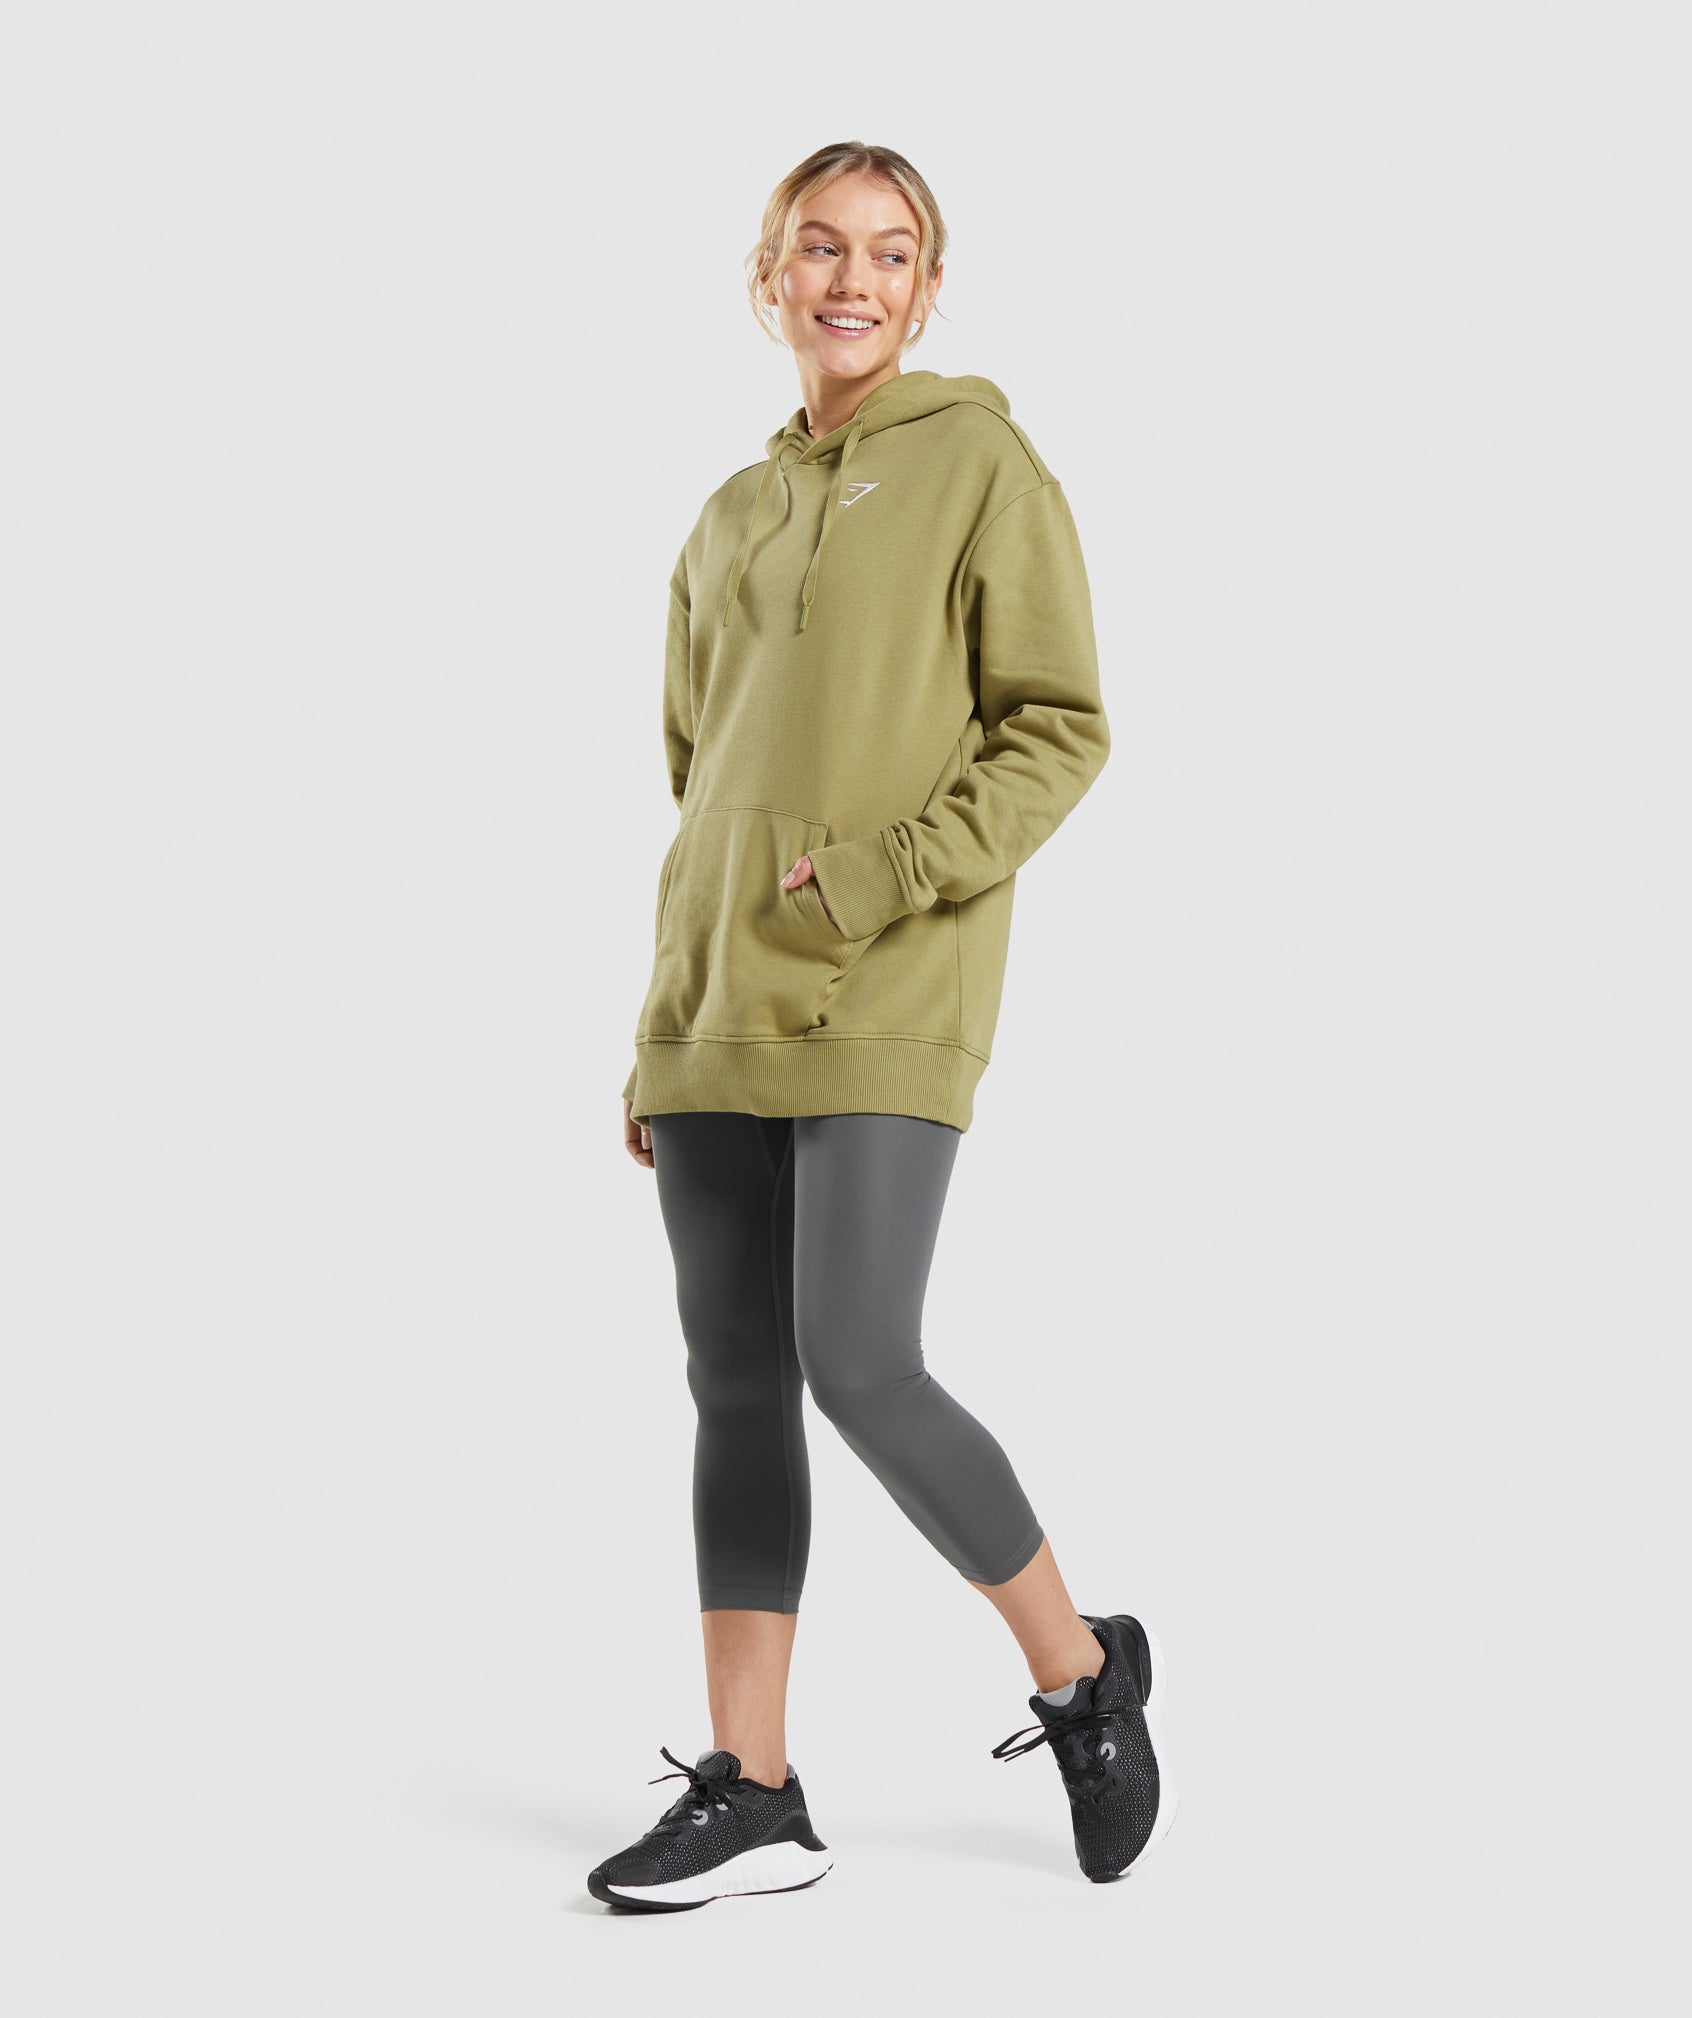 Training Oversized Hoodie in Griffin Green - view 4